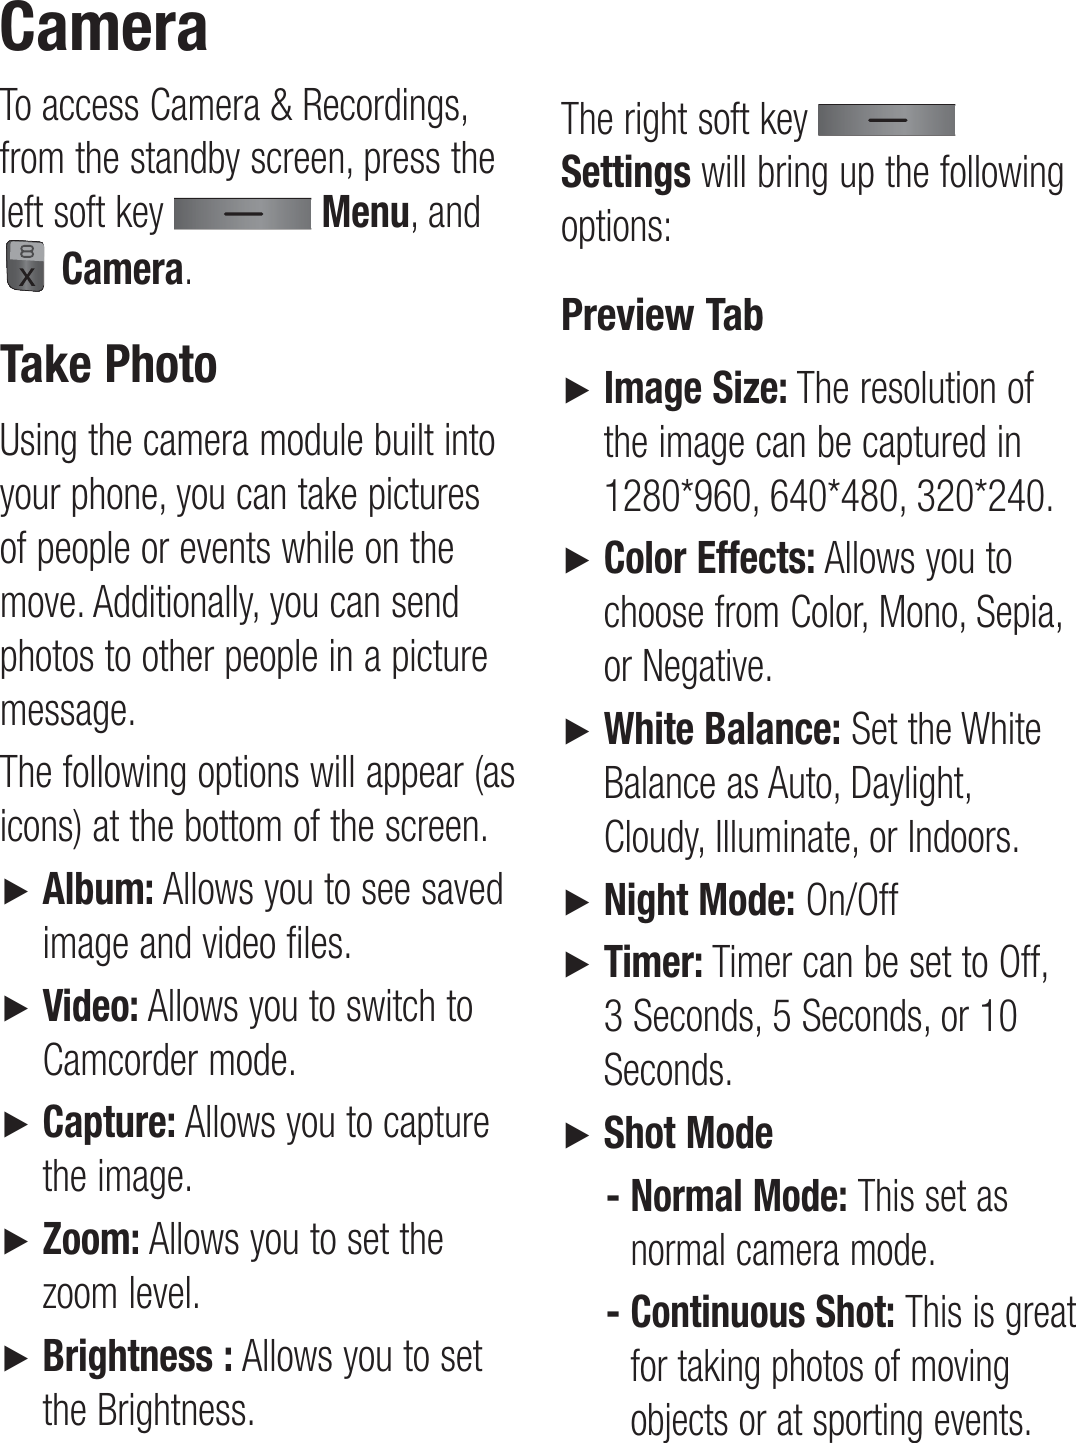 To access Camera &amp; Recordings, from the standby screen, press the left soft key   Menu, and  Camera.Take PhotoUsing the camera module built into your phone, you can take pictures of people or events while on the move. Additionally, you can send photos to other people in a picture message.The following options will appear (as icons) at the bottom of the screen.►   Album: Allows you to see saved image and video files.►   Video: Allows you to switch to Camcorder mode.►   Capture: Allows you to capture the image.►   Zoom: Allows you to set the zoom level.►   Brightness : Allows you to set the Brightness.The right soft key   Settings will bring up the following options:Preview Tab►   Image Size: The resolution of the image can be captured in 1280*960, 640*480, 320*240.►   Color Effects: Allows you to choose from Color, Mono, Sepia, or Negative.►   White Balance: Set the White Balance as Auto, Daylight, Cloudy, Illuminate, or Indoors.►   Night Mode: On/Off►   Timer: Timer can be set to Off, 3 Seconds, 5 Seconds, or 10 Seconds.►   Shot Mode-  Normal Mode: This set as normal camera mode.-  Continuous Shot: This is great for taking photos of moving objects or at sporting events. Camera 